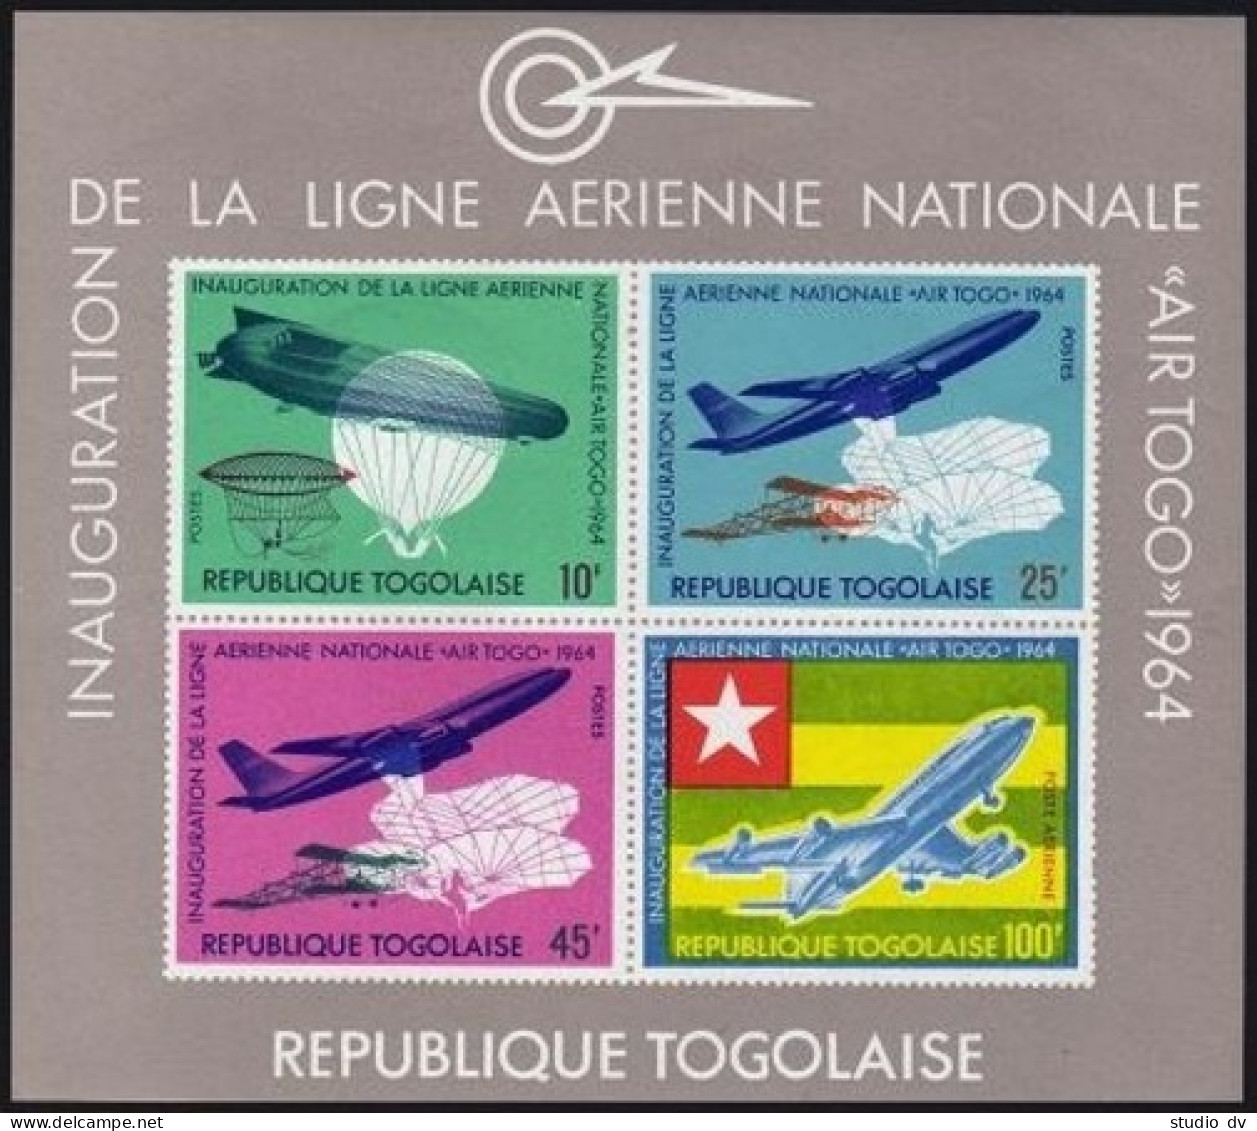 Togo 499a,MNH-as Hinged.Michel Bl.16. National Airlines,1964. - Togo (1960-...)